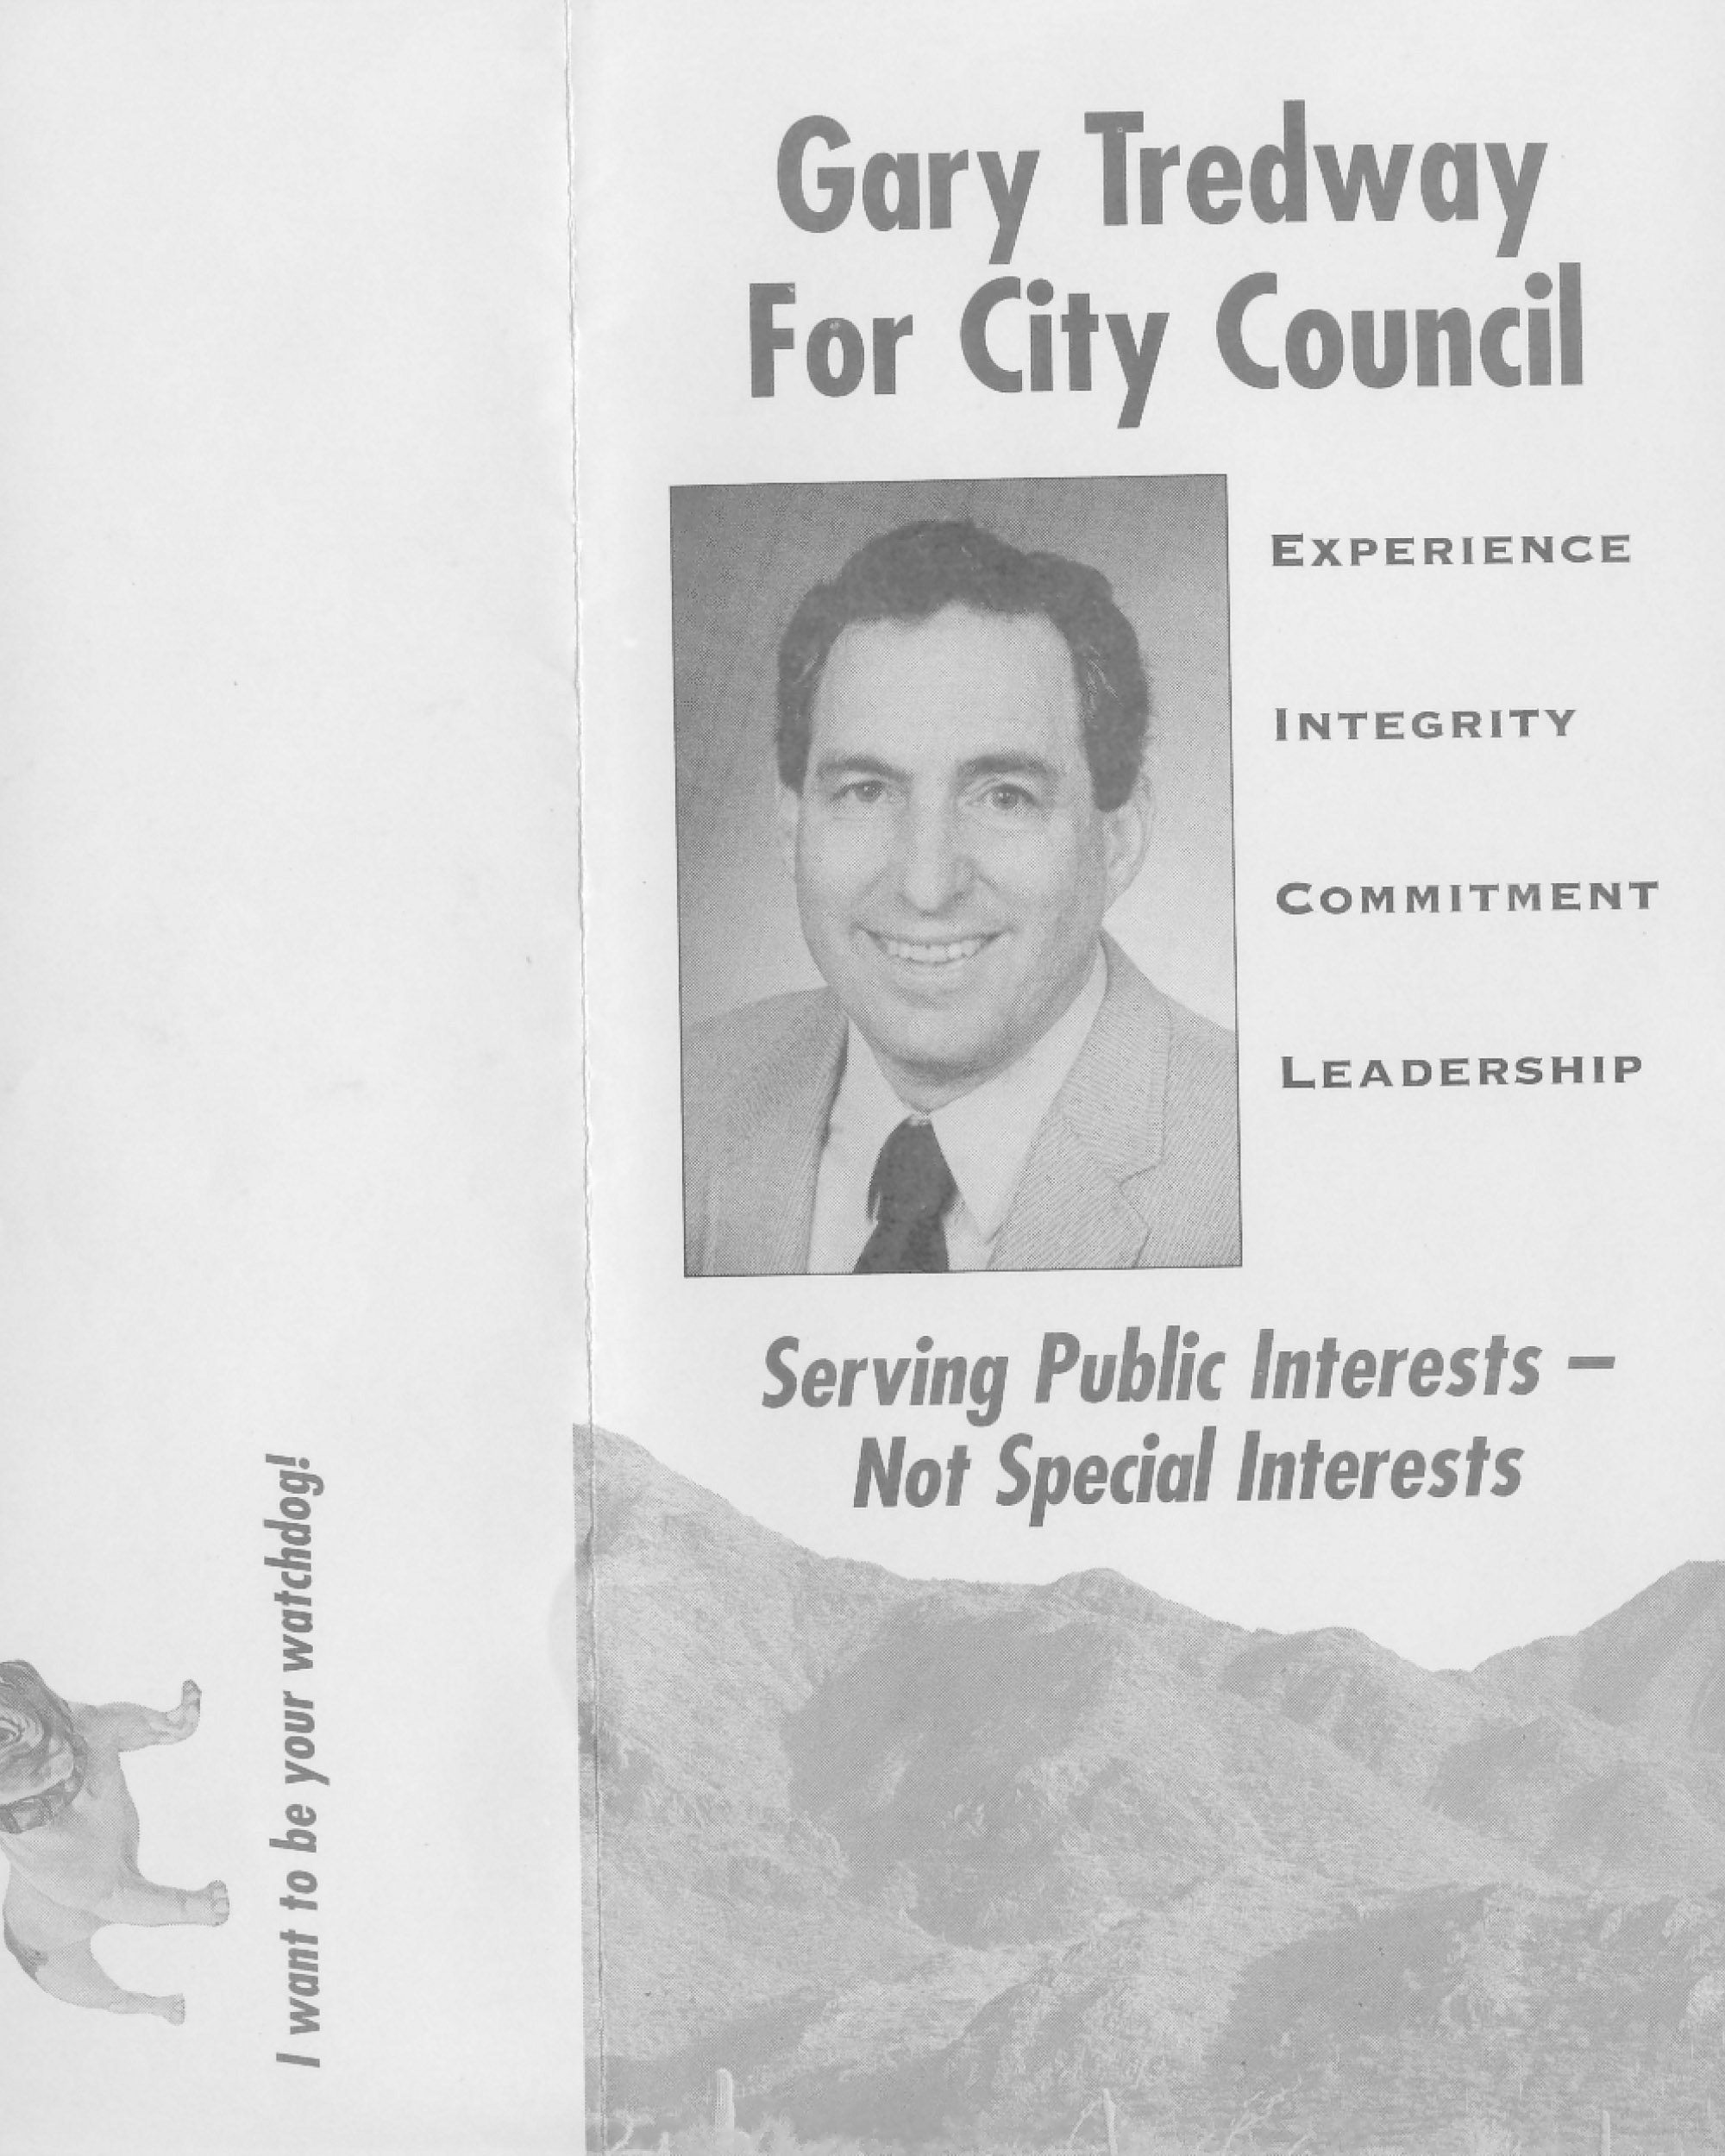 An original flyer from Howard’s Scottsdale City Council election campaign as Gary Tredway.